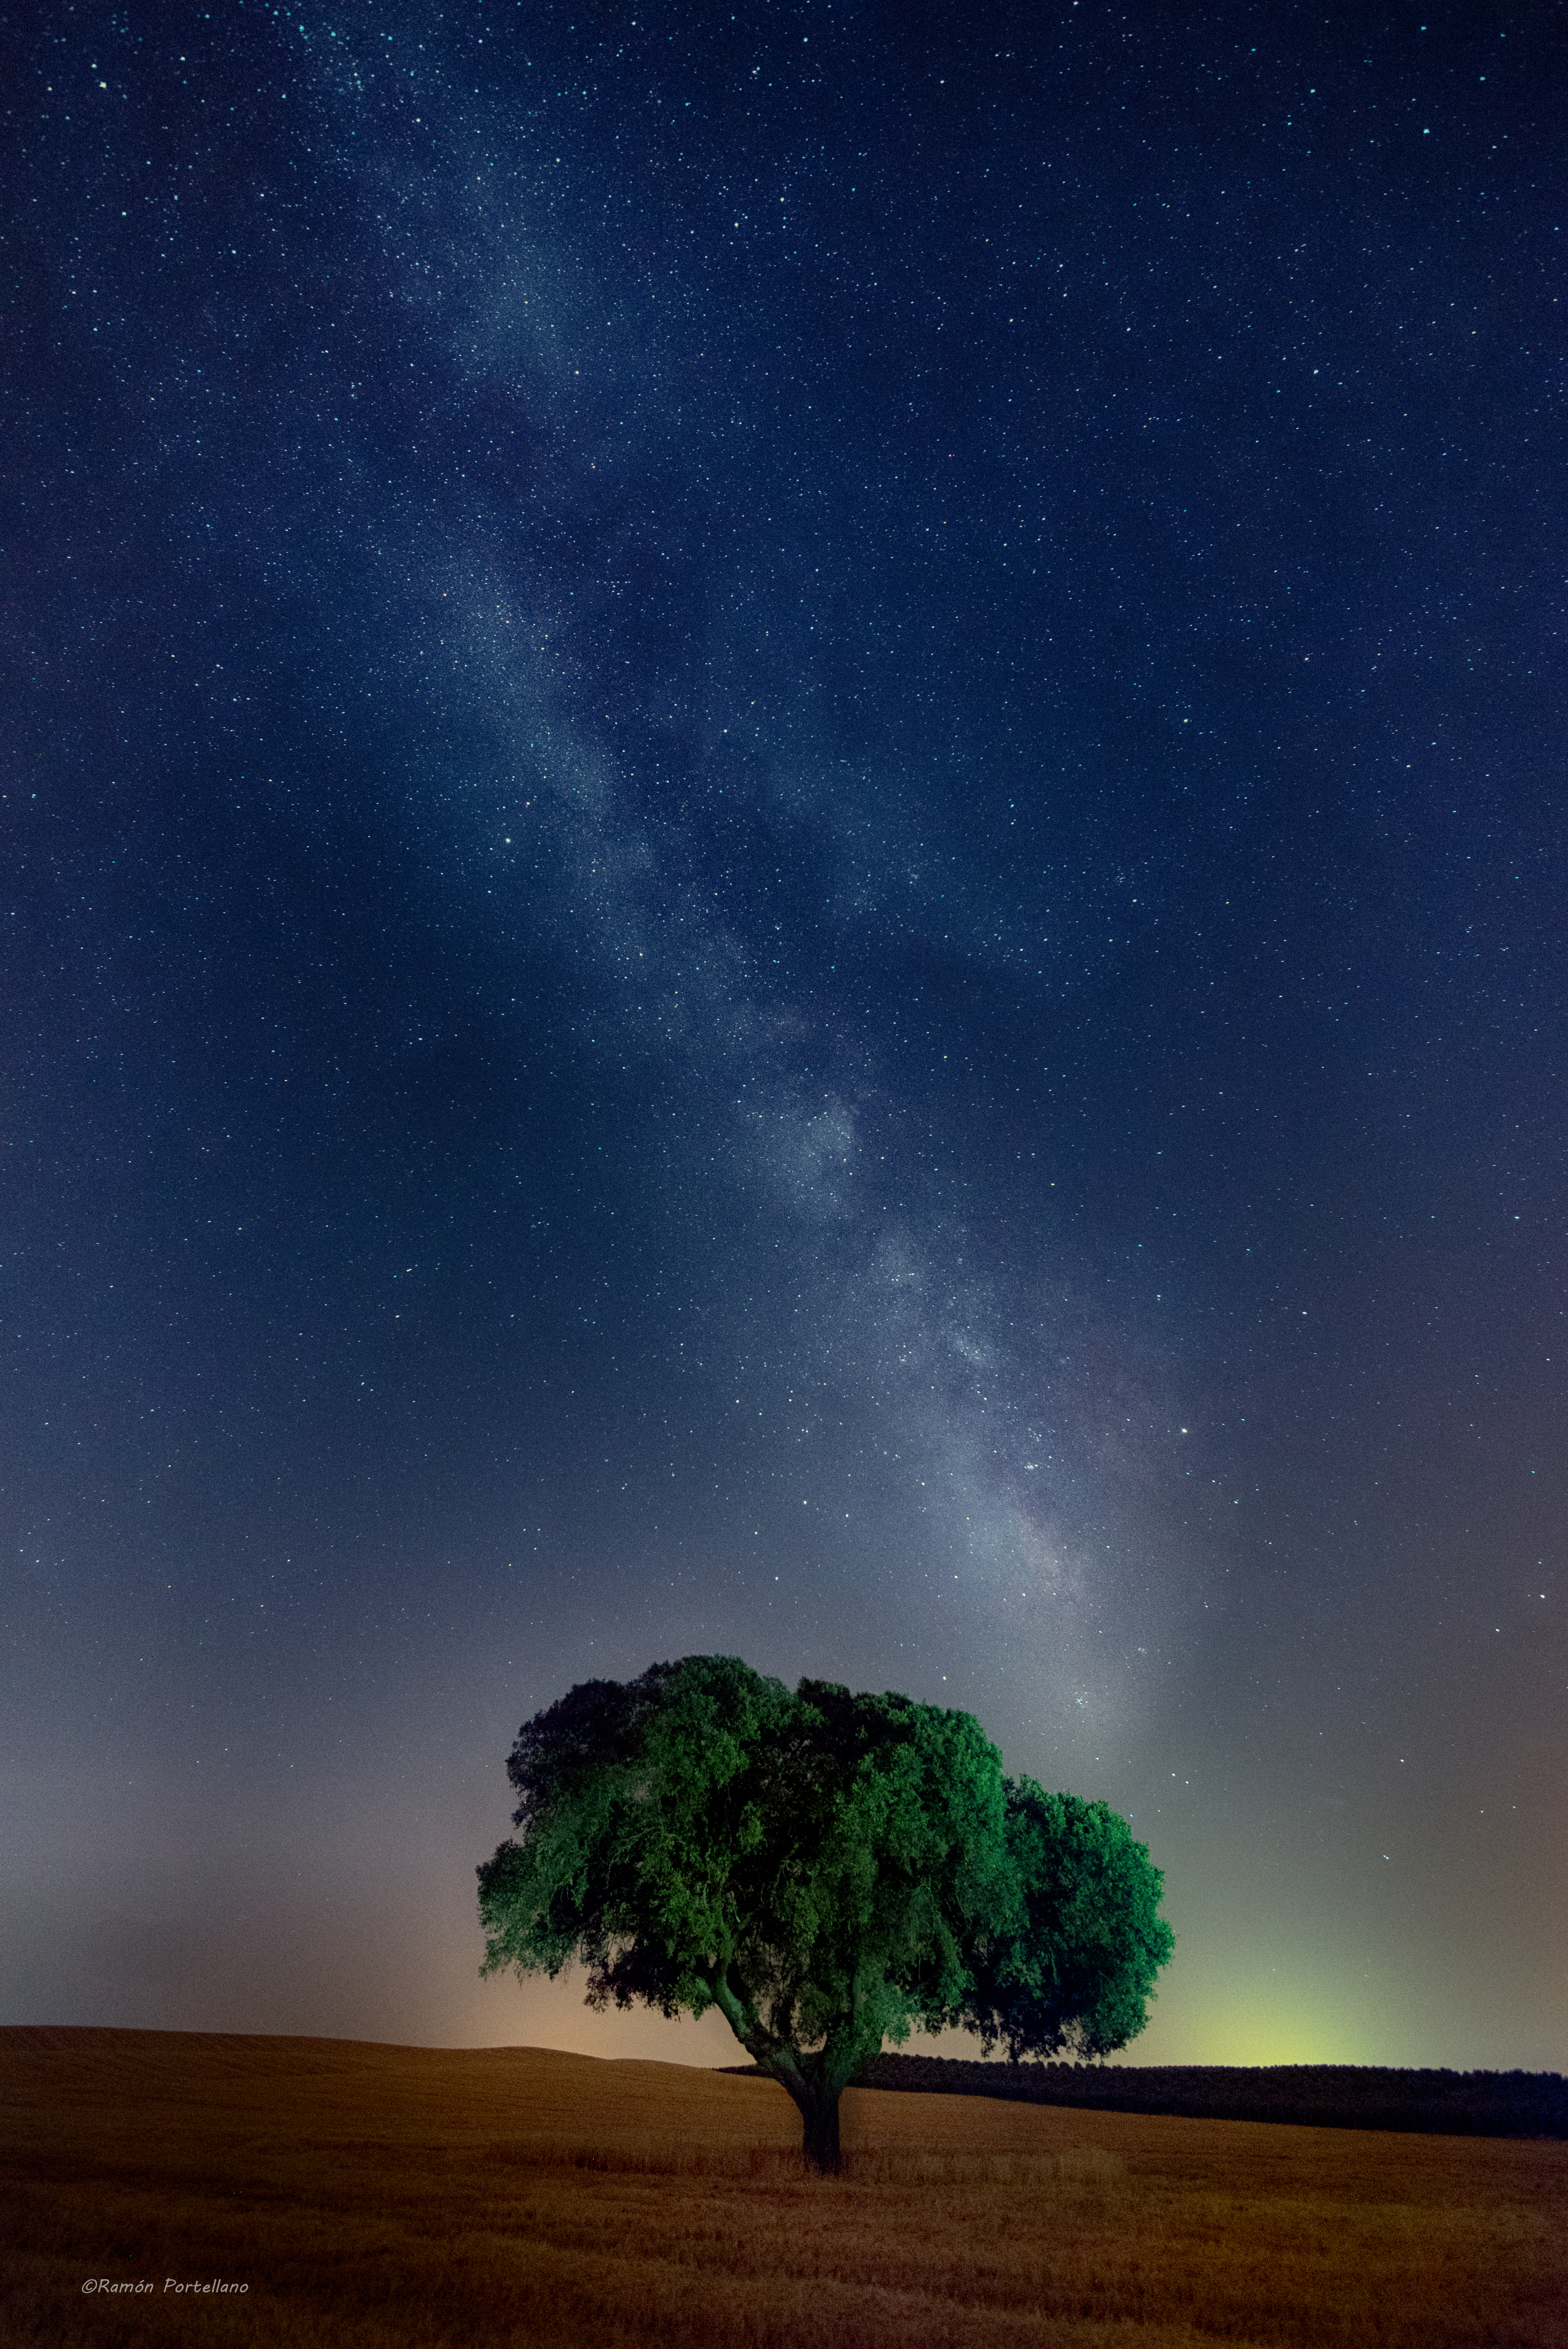 wood, tree, nature, grass, night, starry sky, field wallpaper for mobile